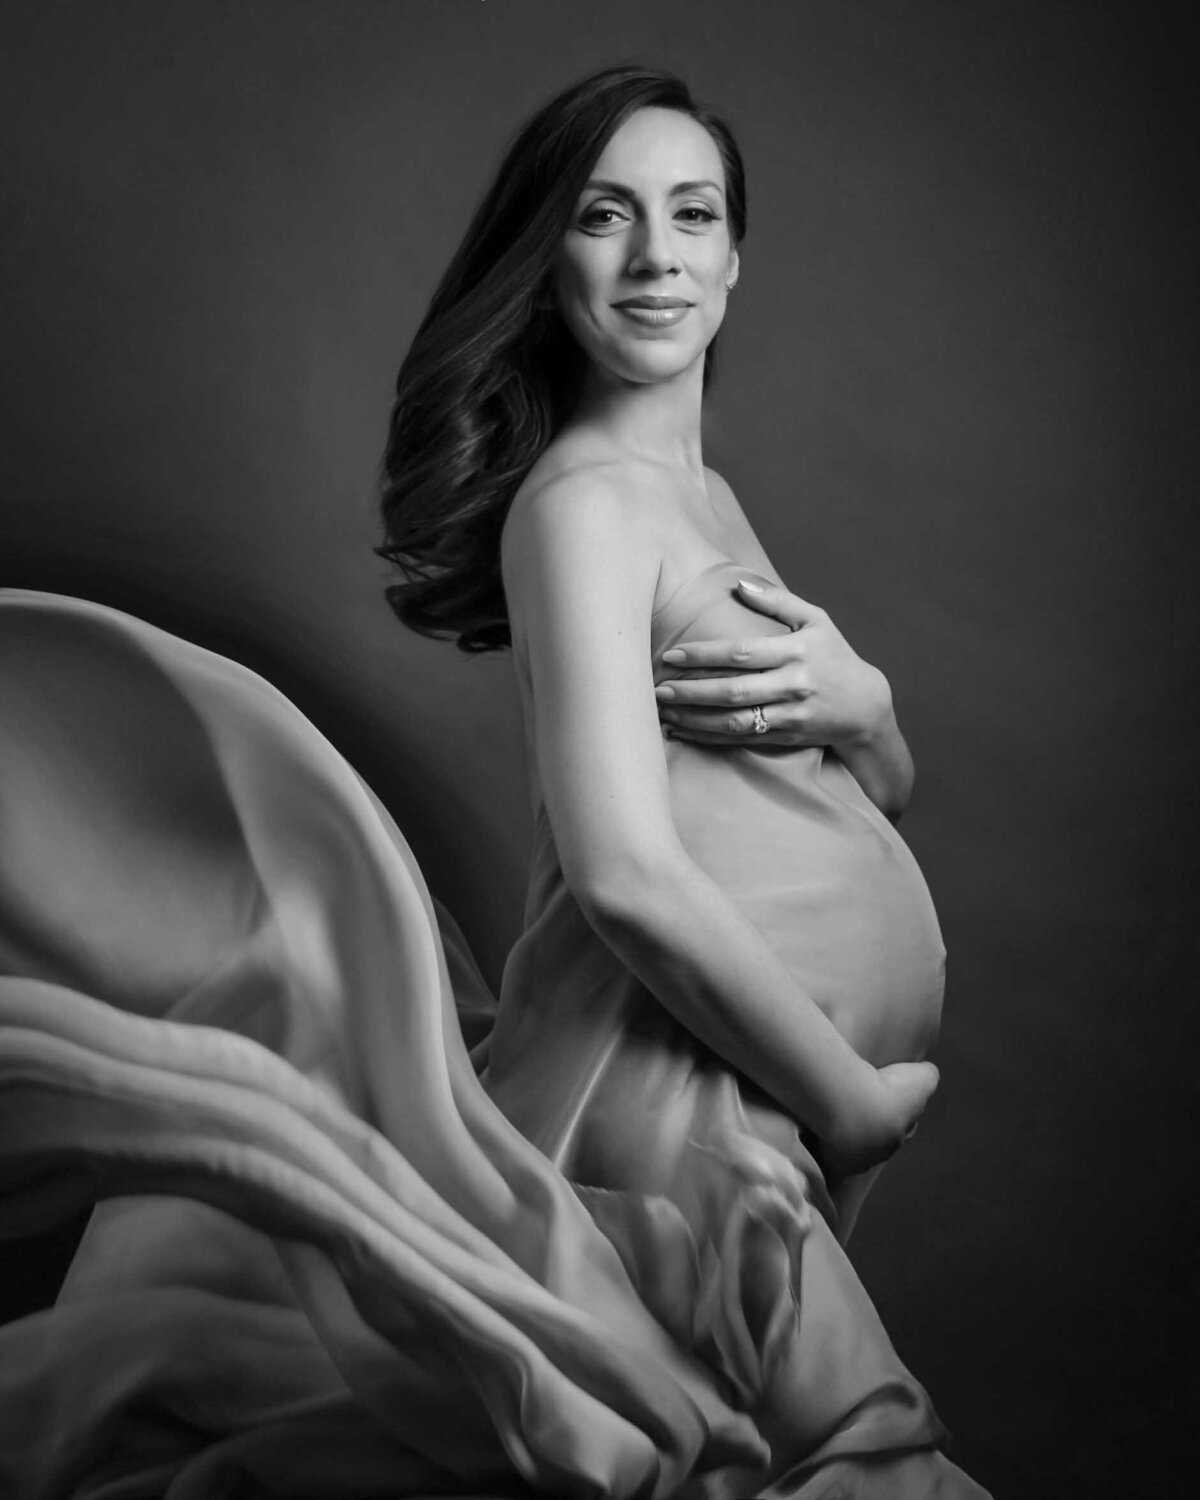 Beautiful black and white maternity photography by Daisy Rey NJ and New York photographer